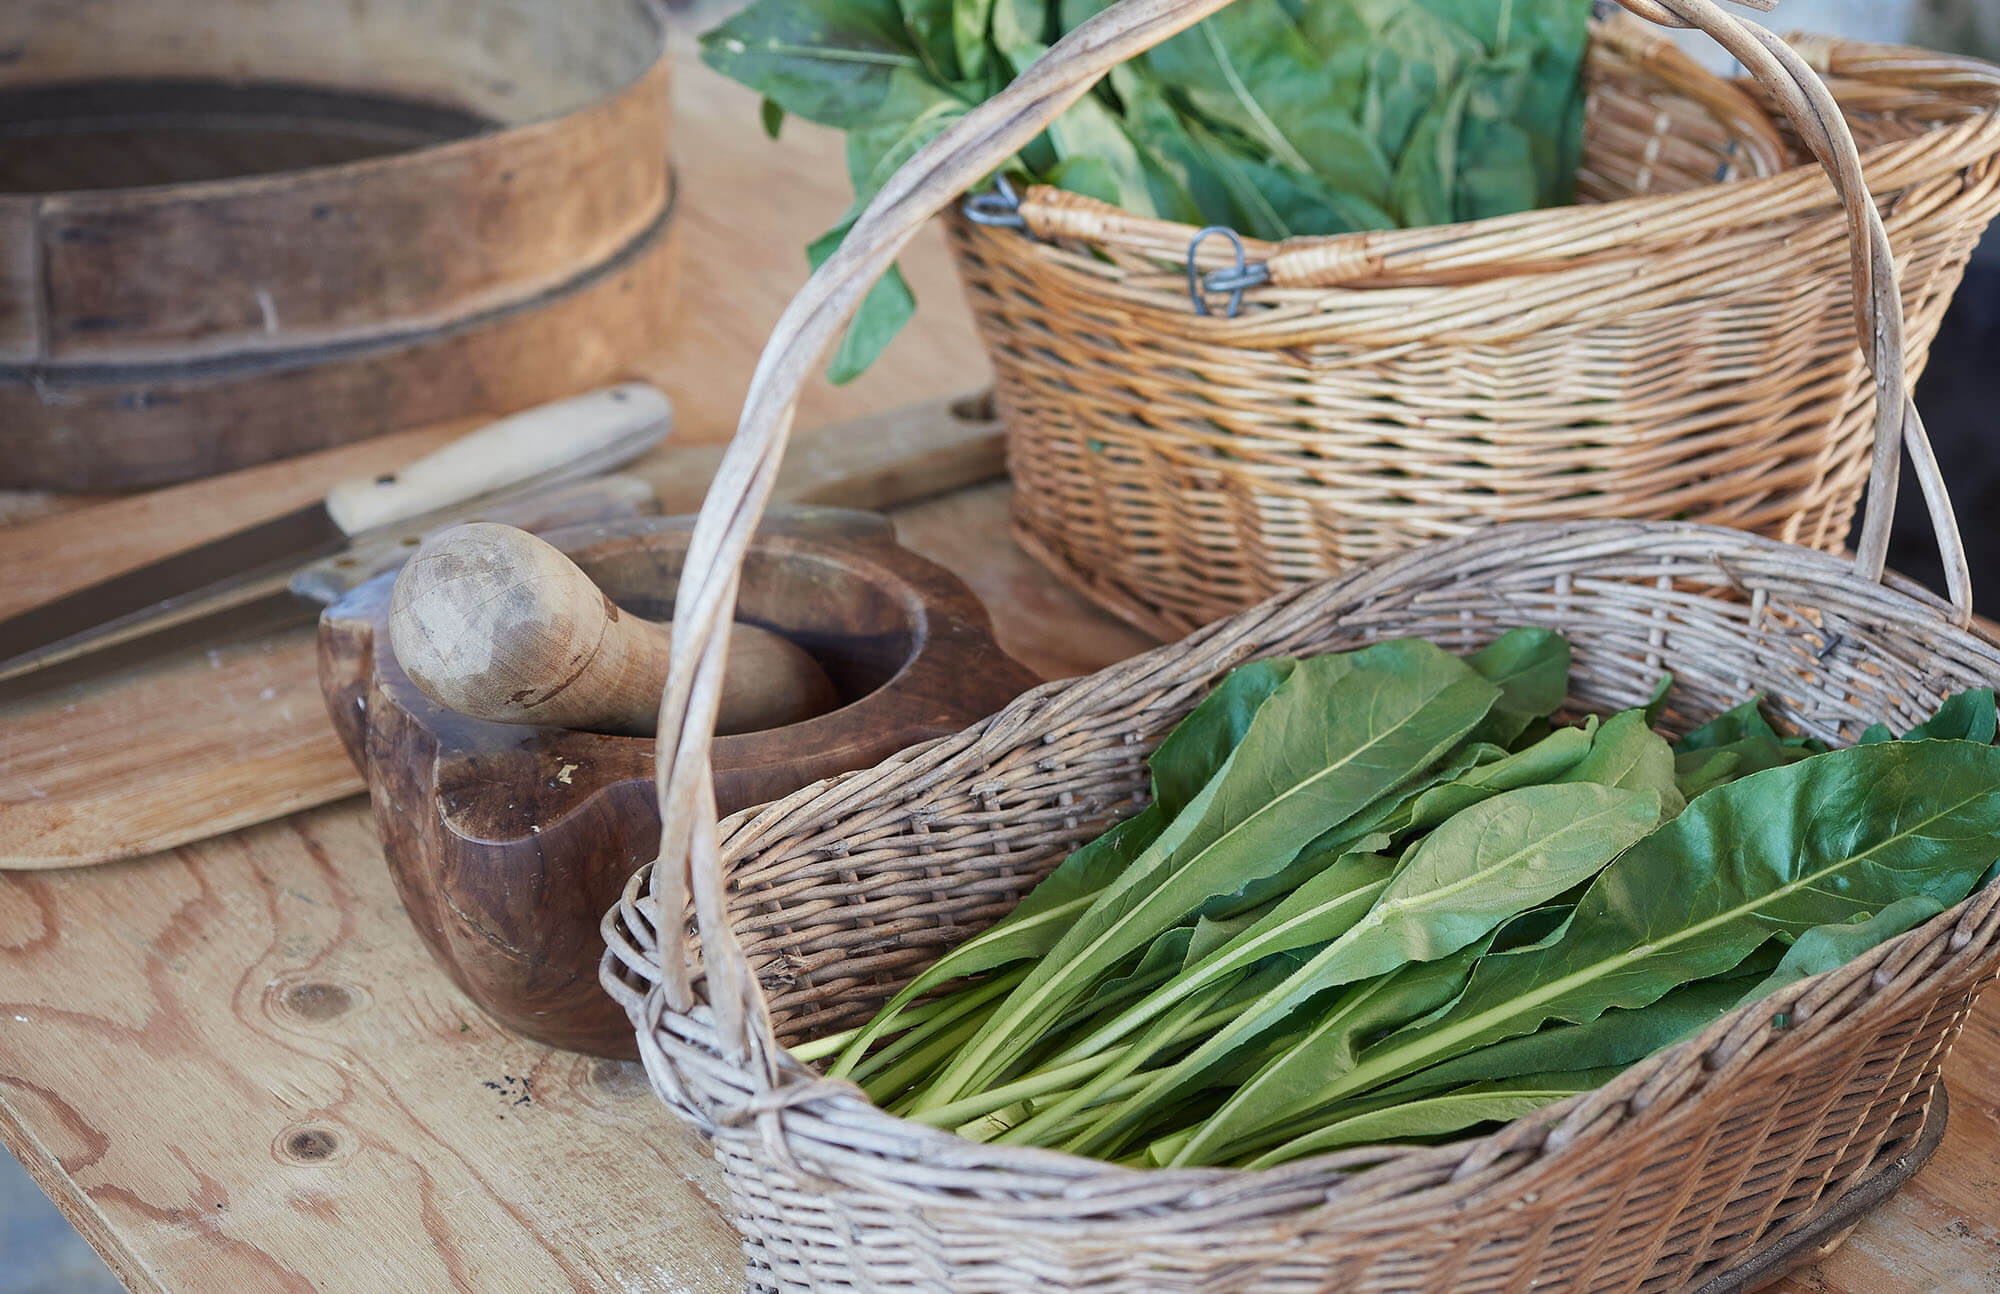 Woad leaves in a basket